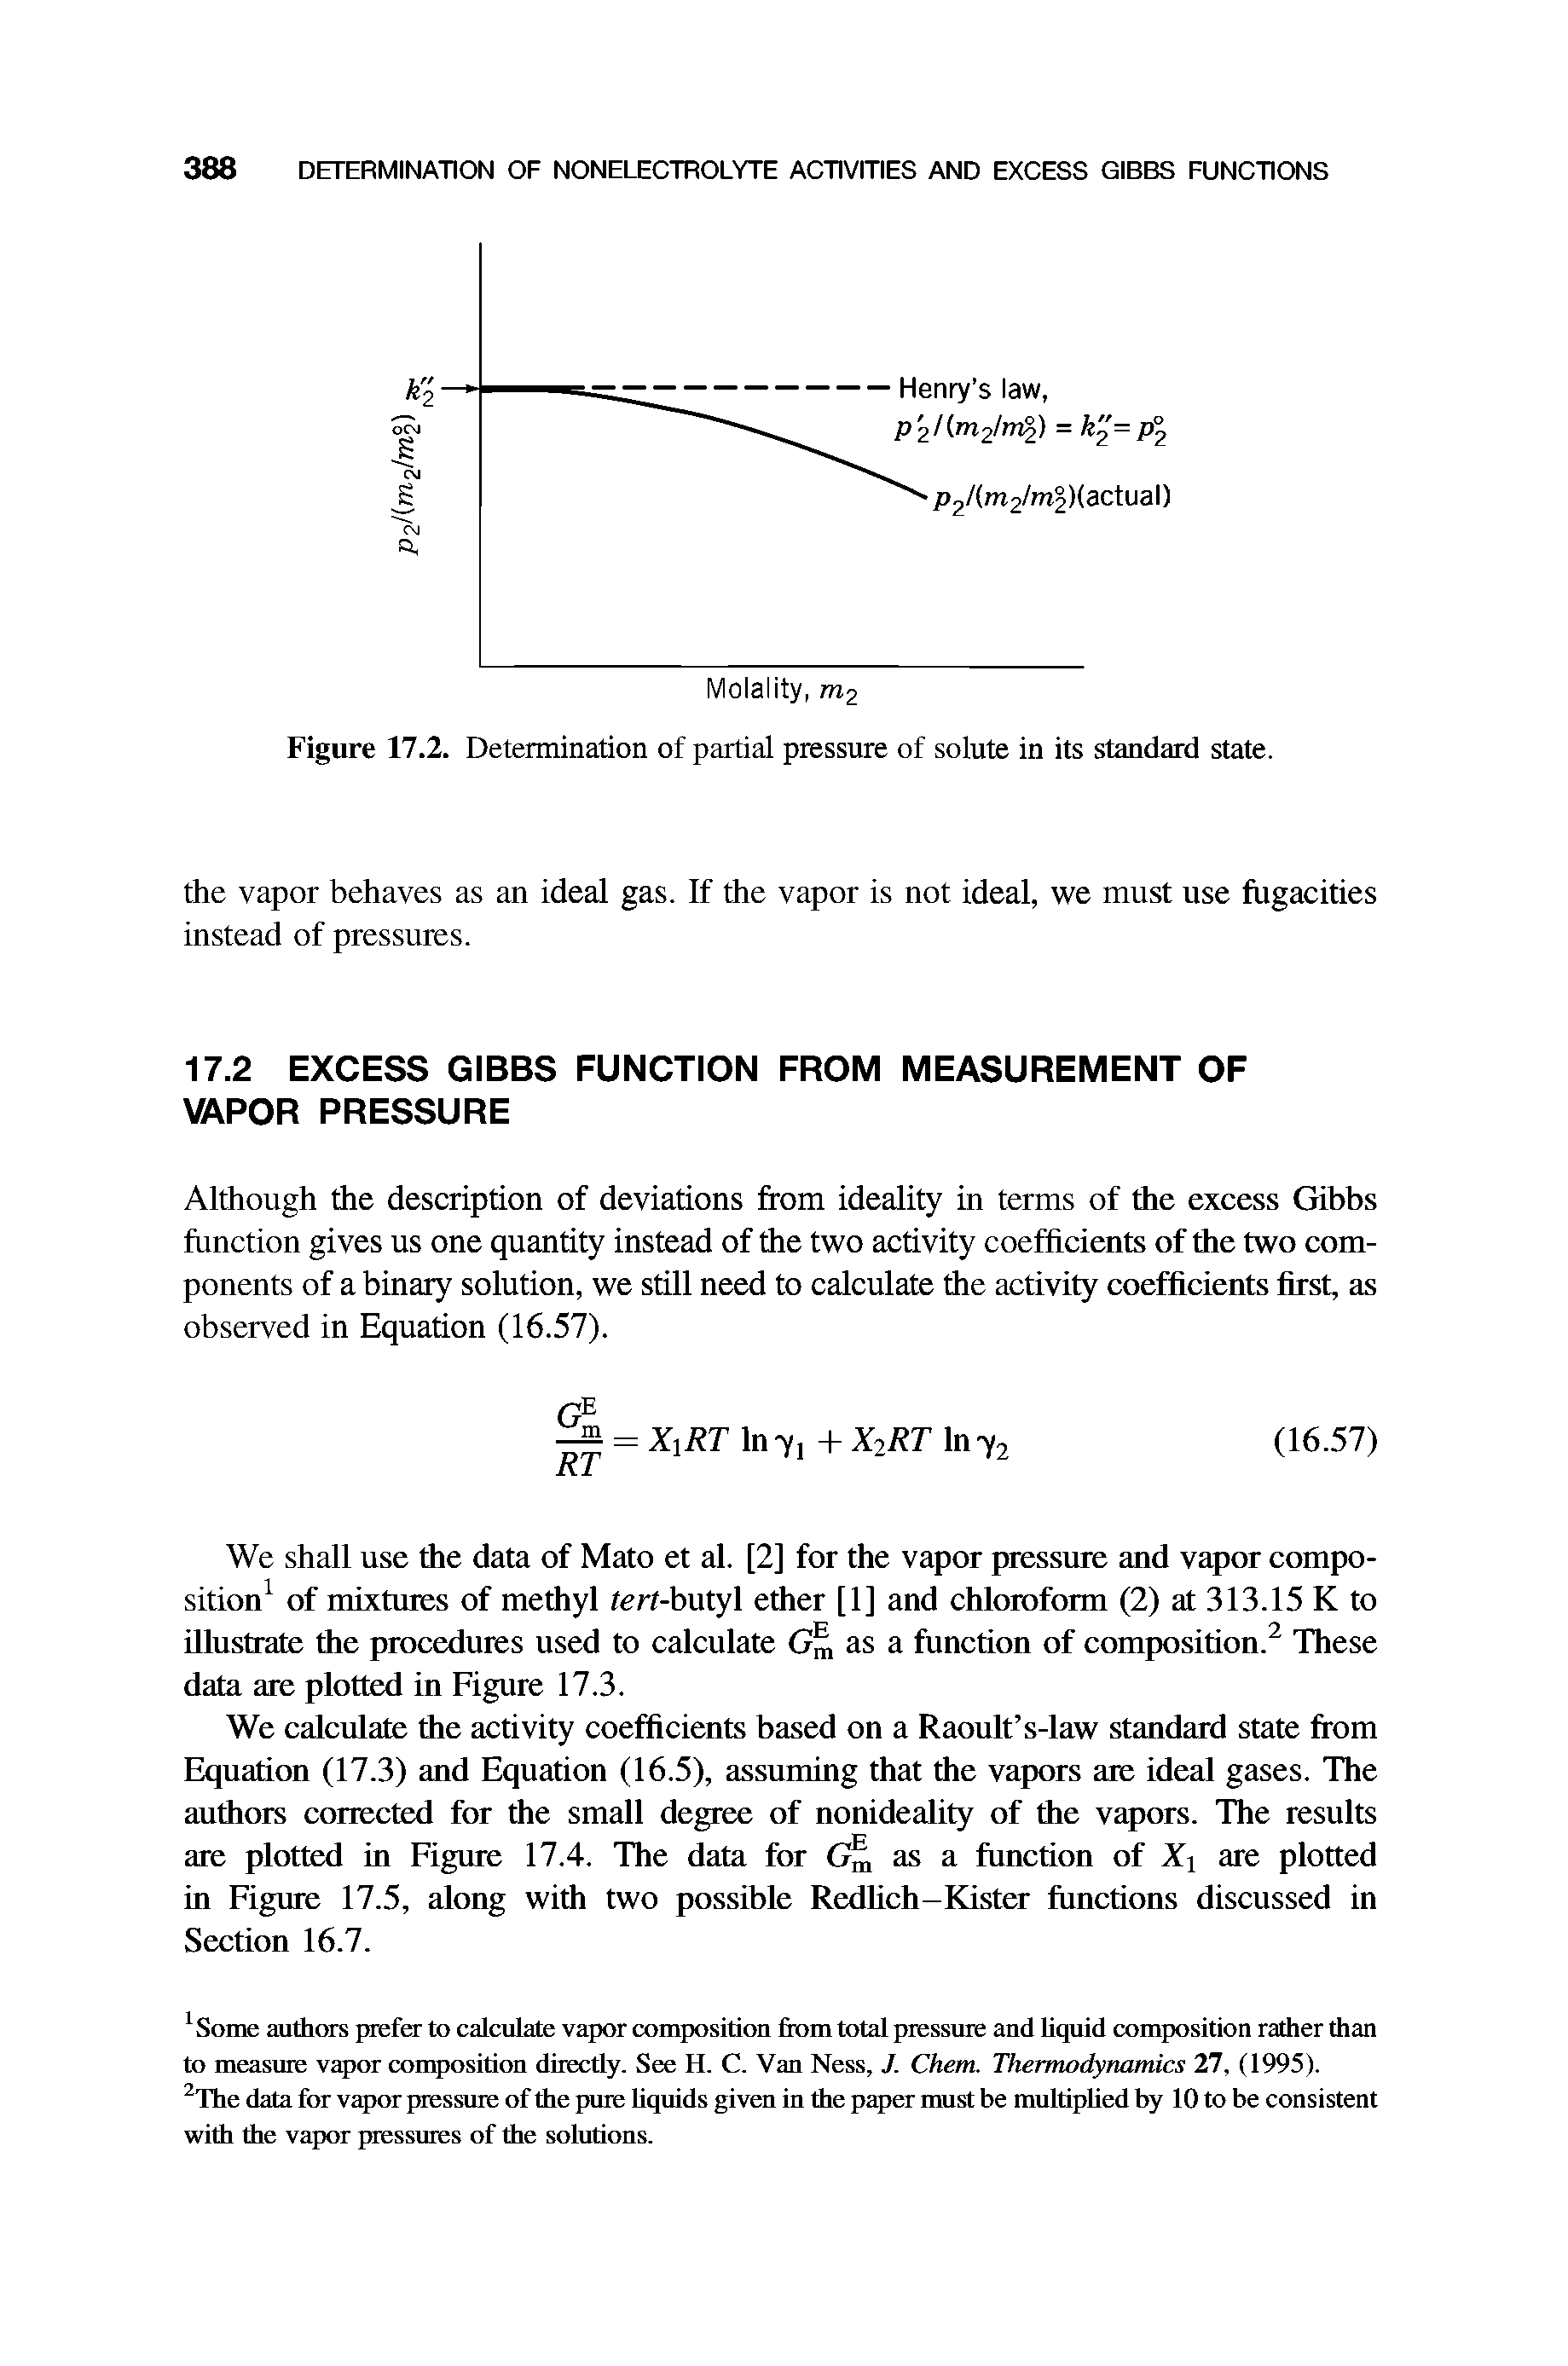 Figure 17.2. Determination of partial pressure of solute in its standard state.